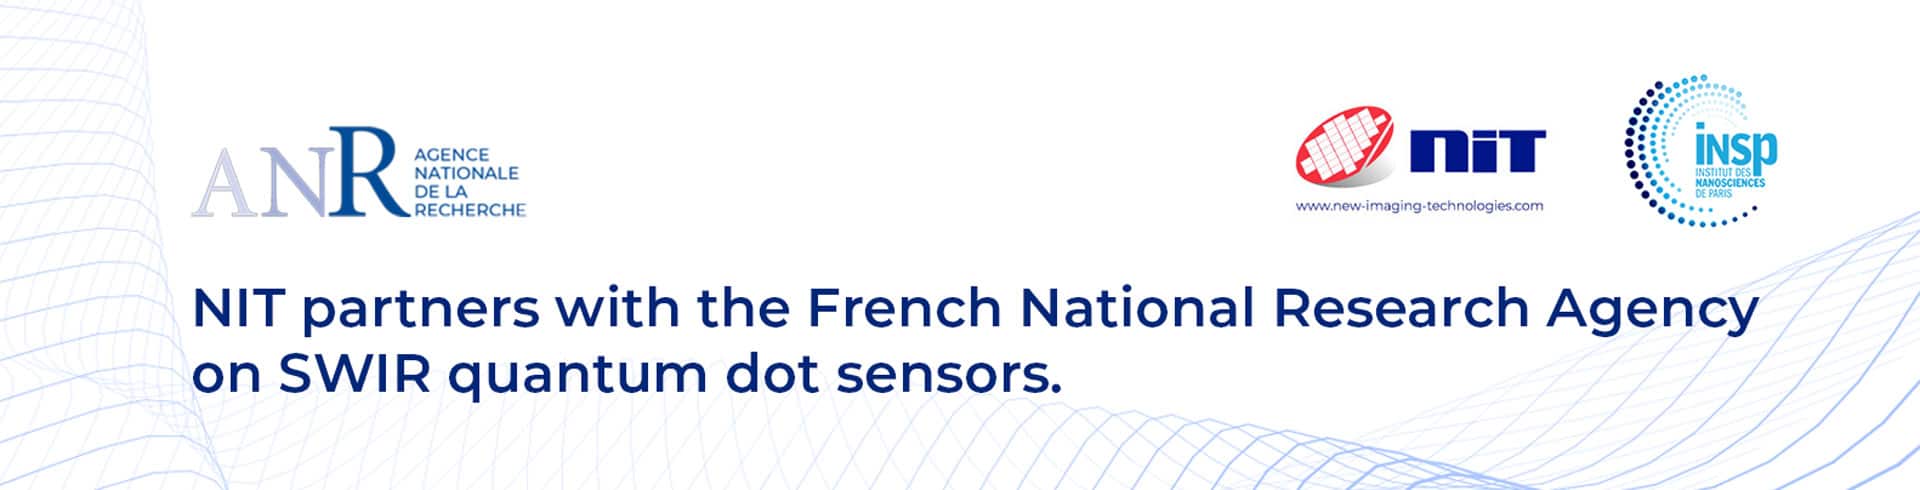 NIT partners with the French National Research Agency on SWIR quantum dot sensors.